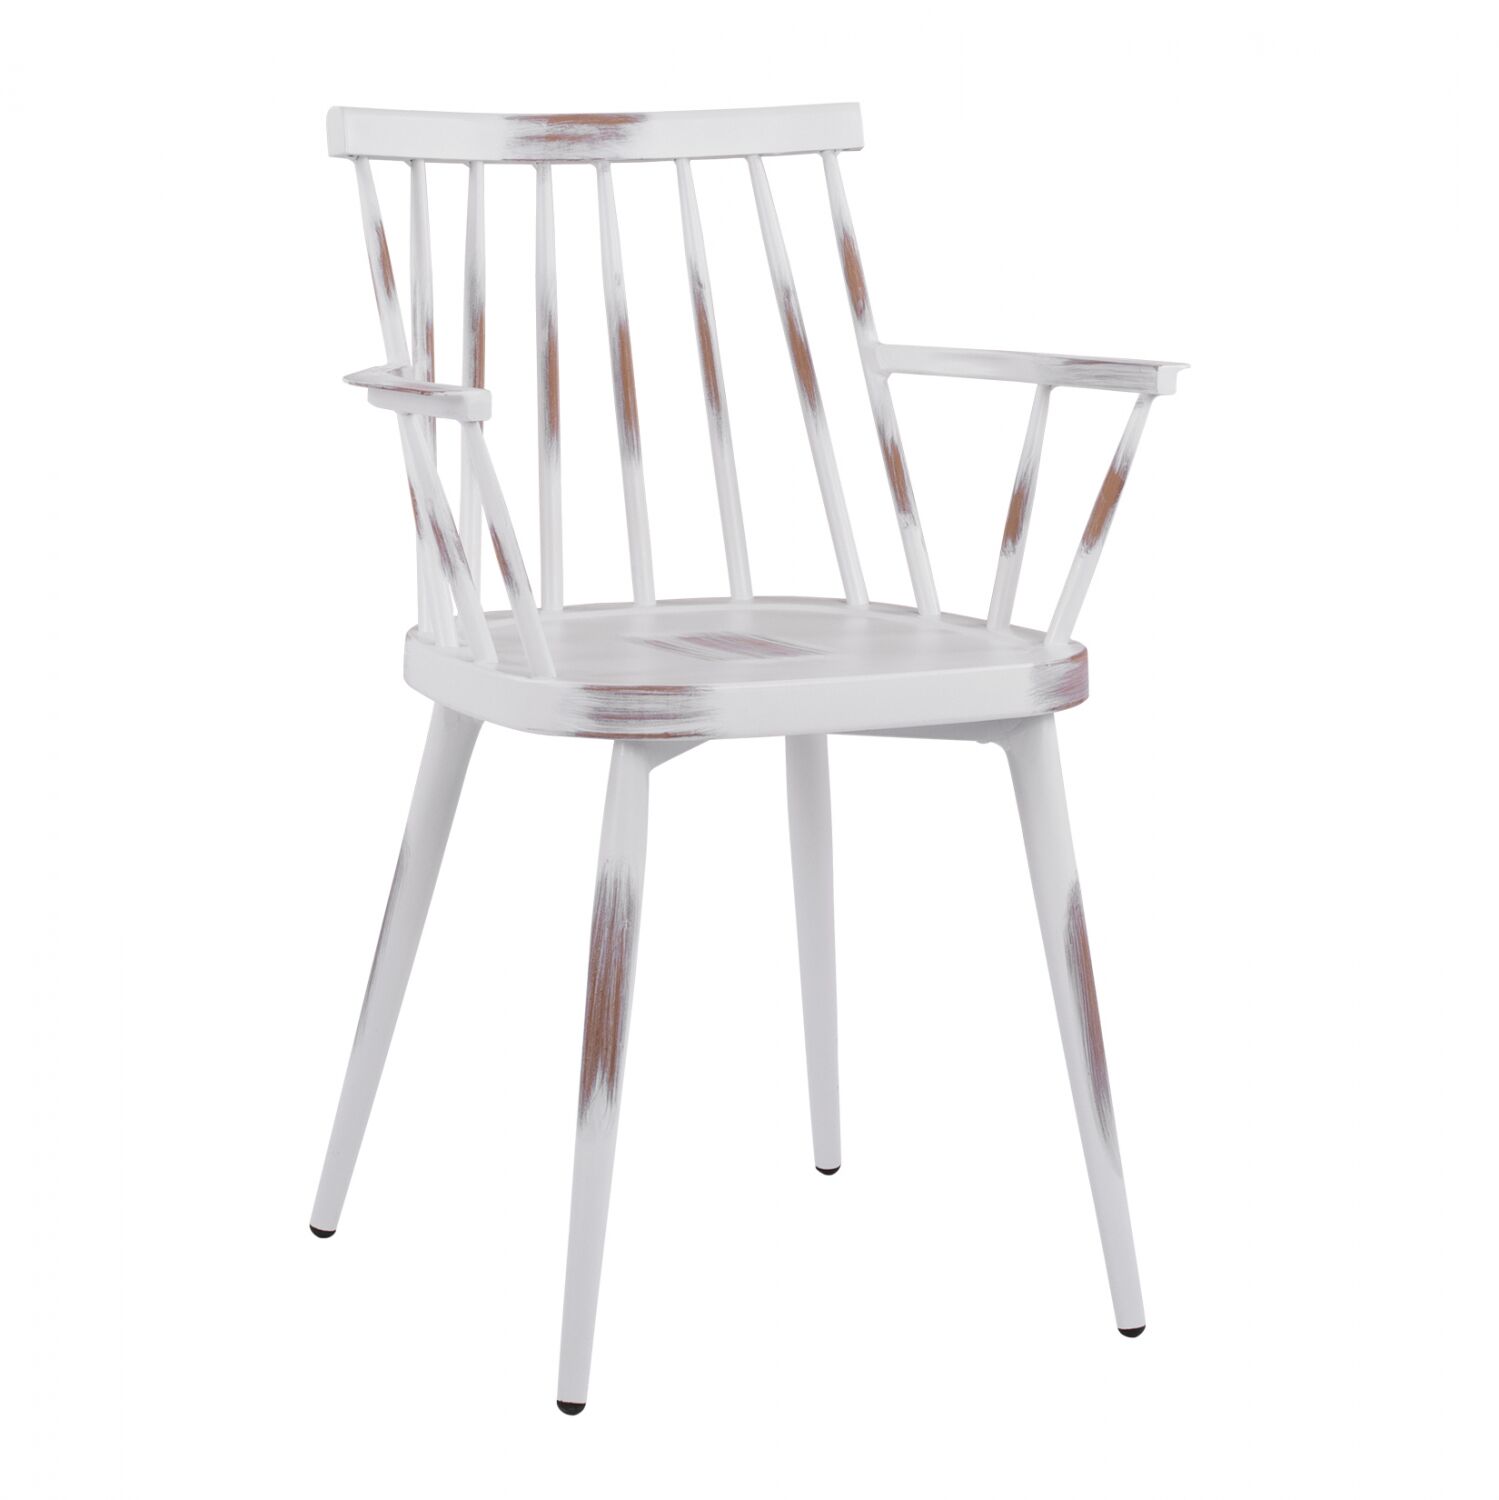 Aluminum chair with arms Yvonne HM5555.02 White